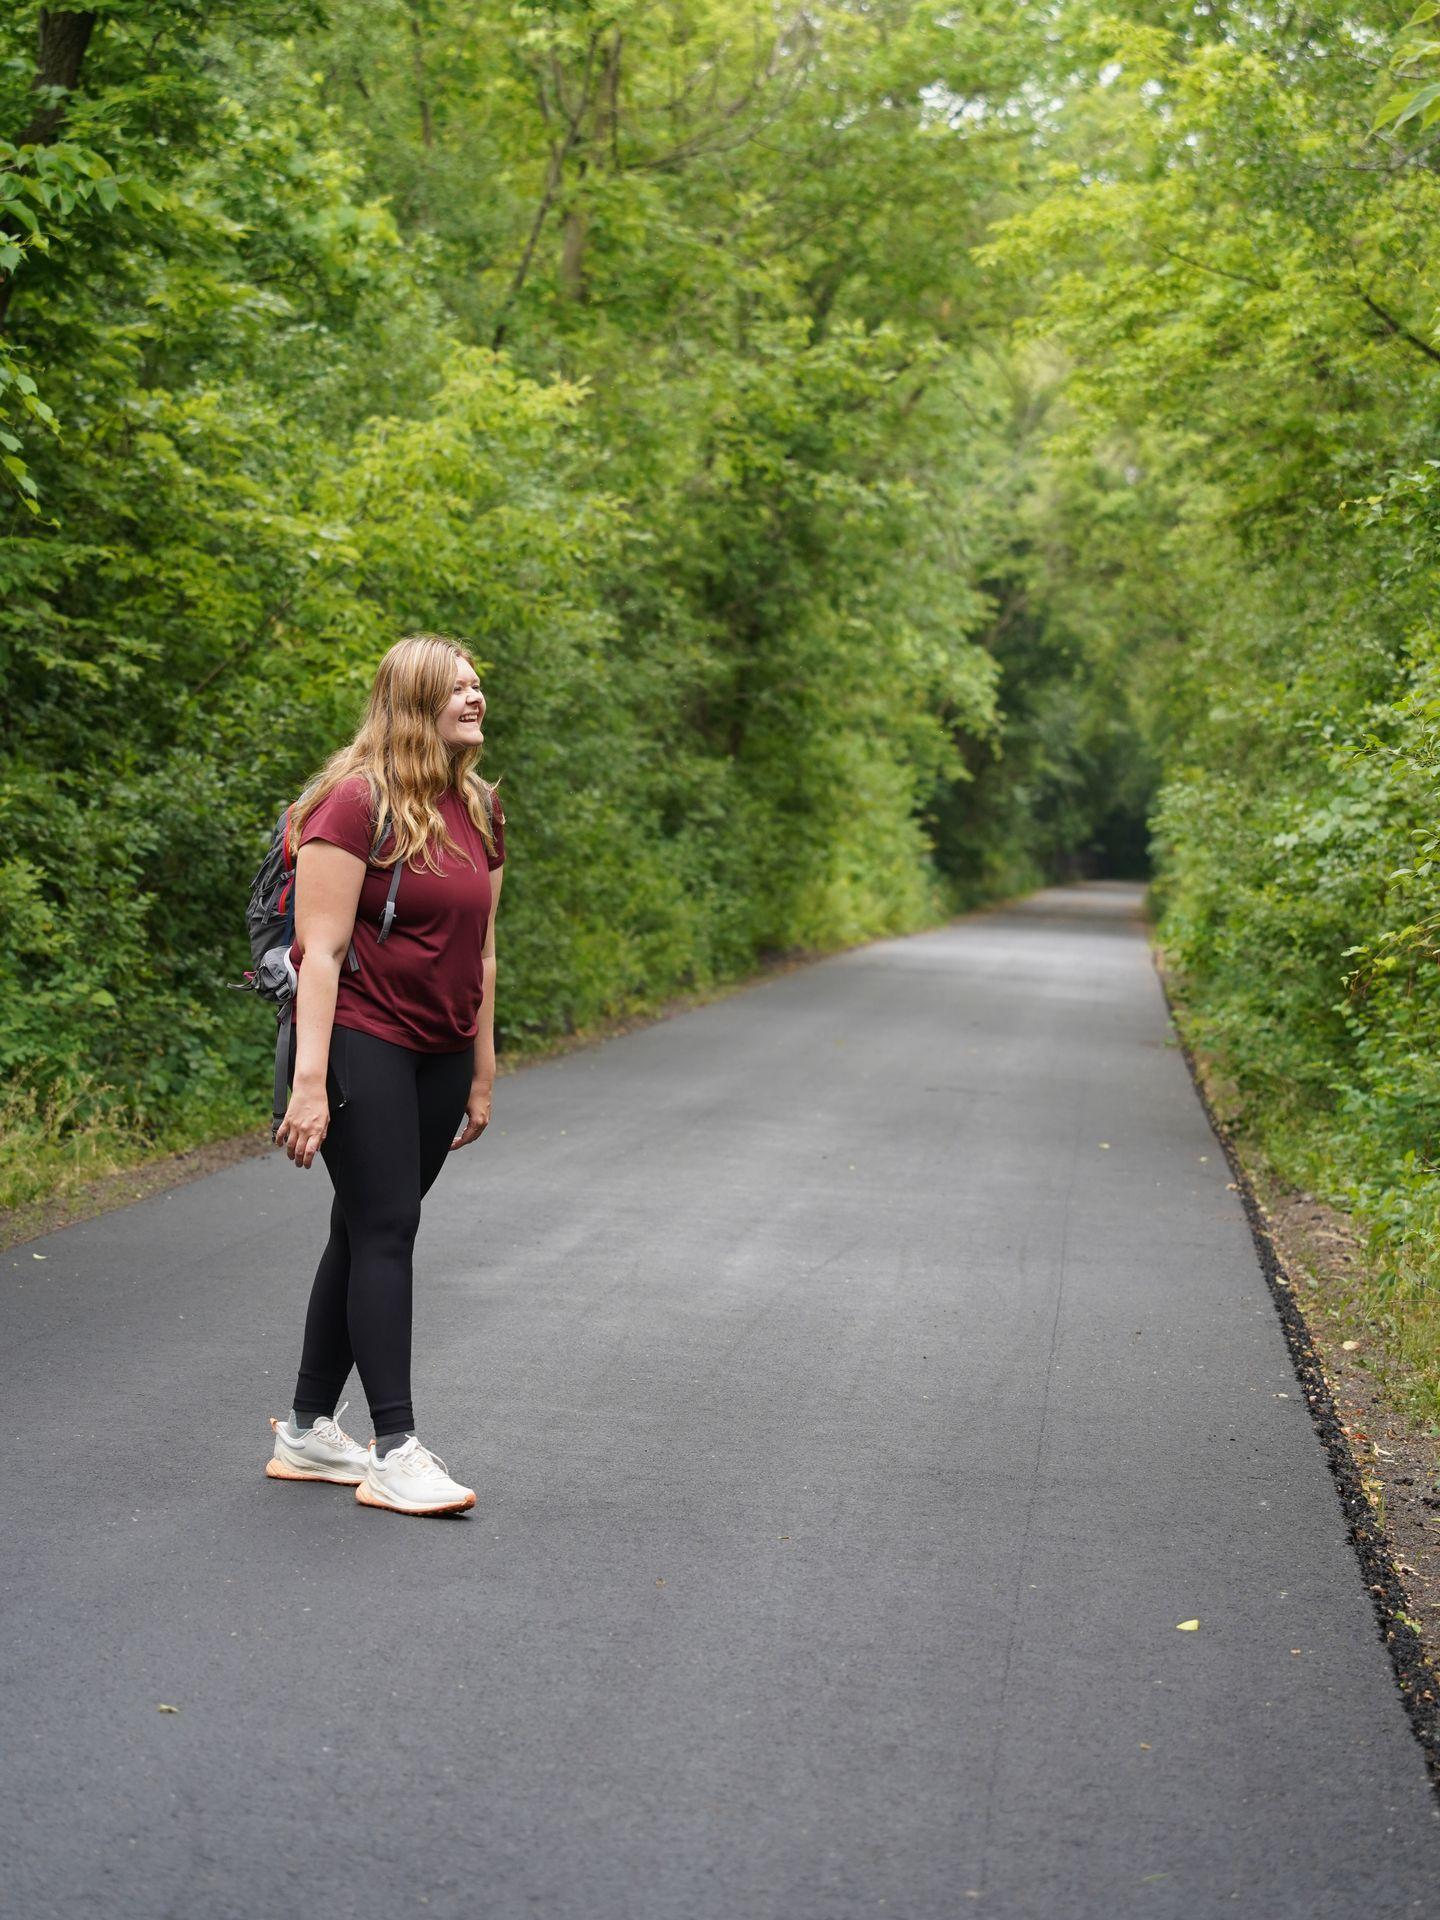 Lydia hiking on a paved path in Minnesota